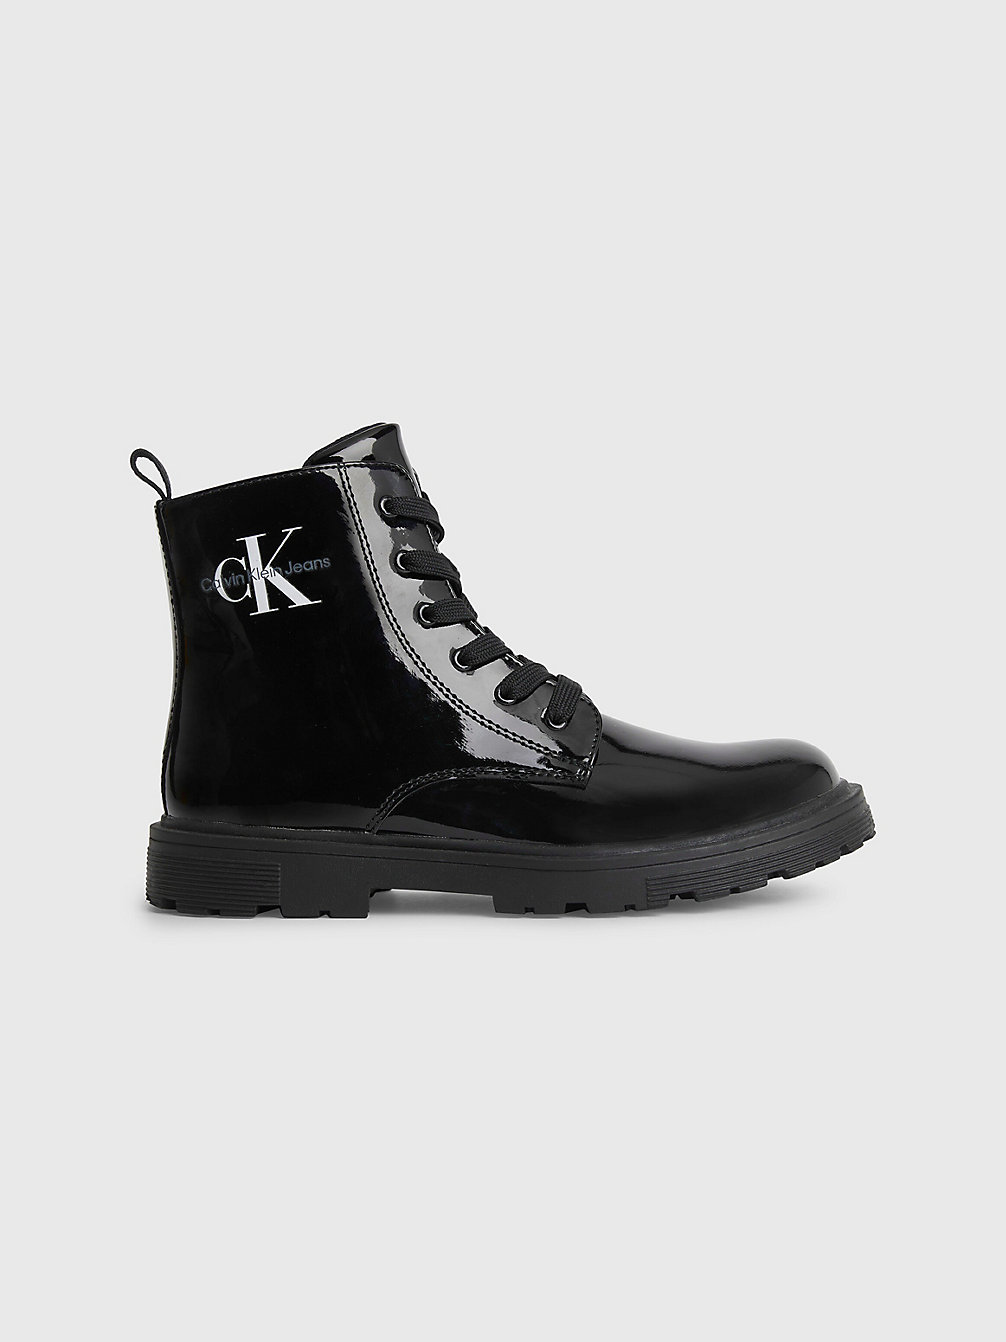 BLACK Recycled Patent Leather Kids Boots undefined girls Calvin Klein